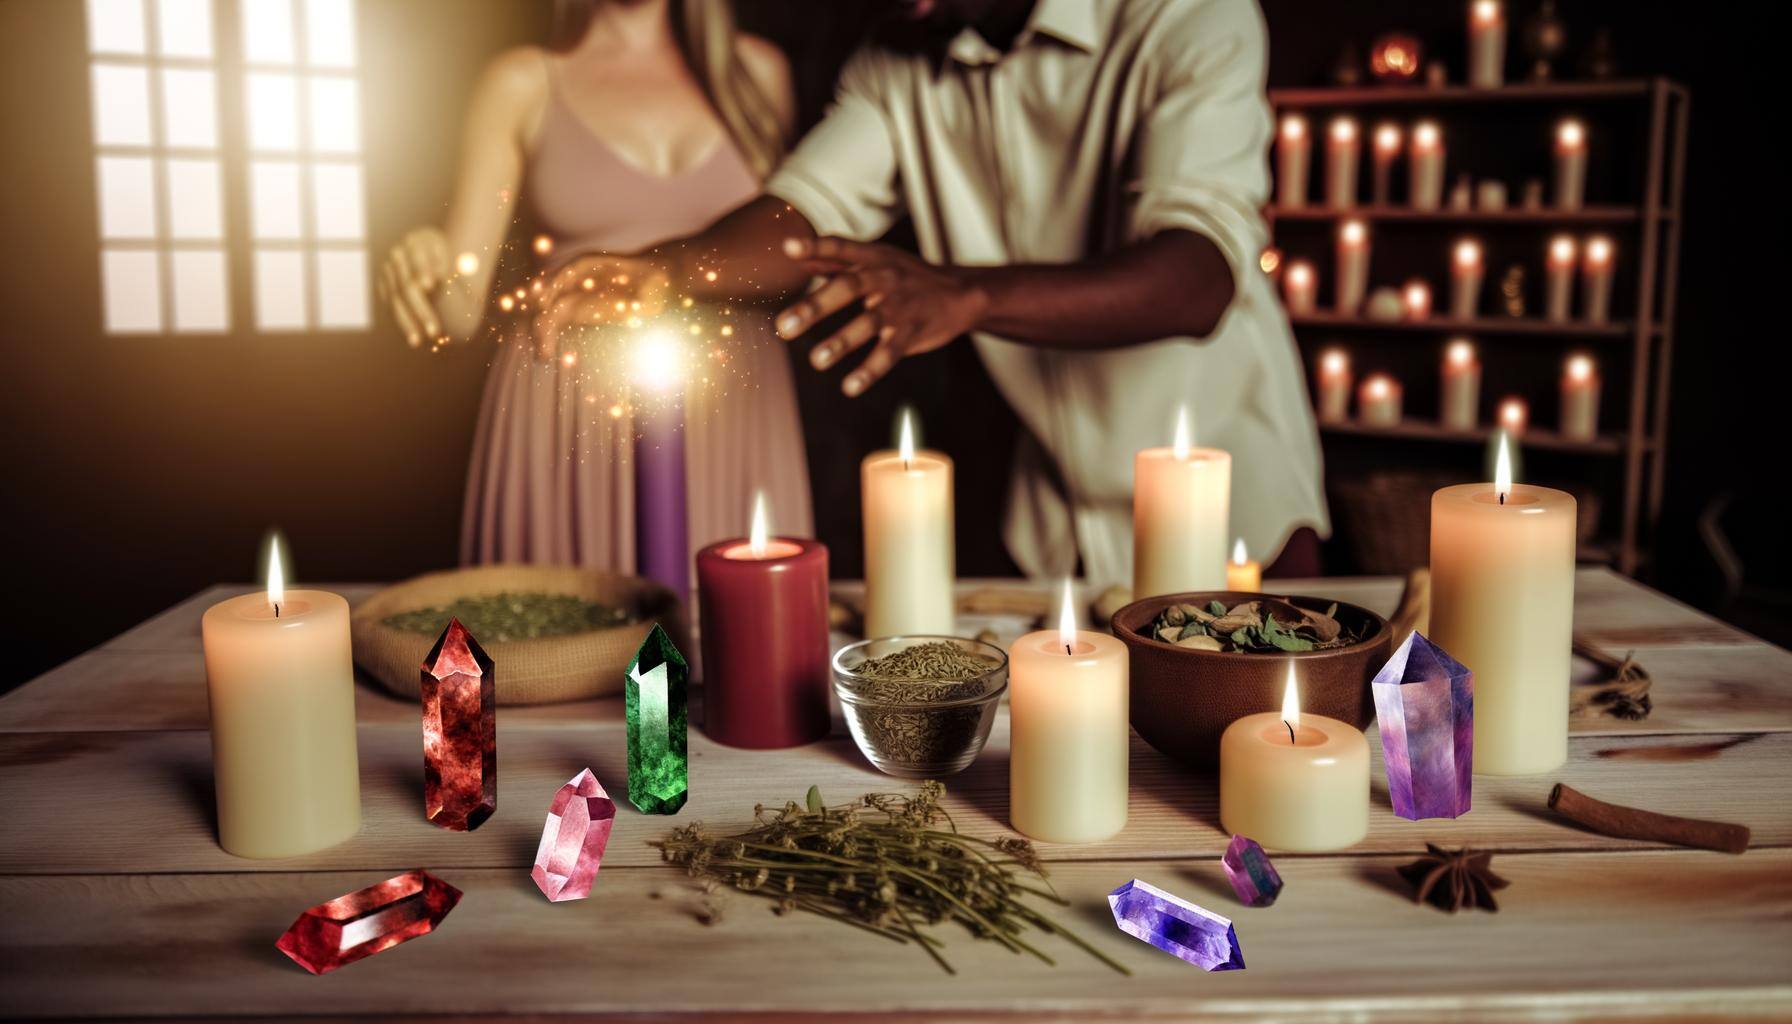 An image of someone casting a loyalty spell for their partner, surrounded by candles, herbs, and crystals in a sacred space